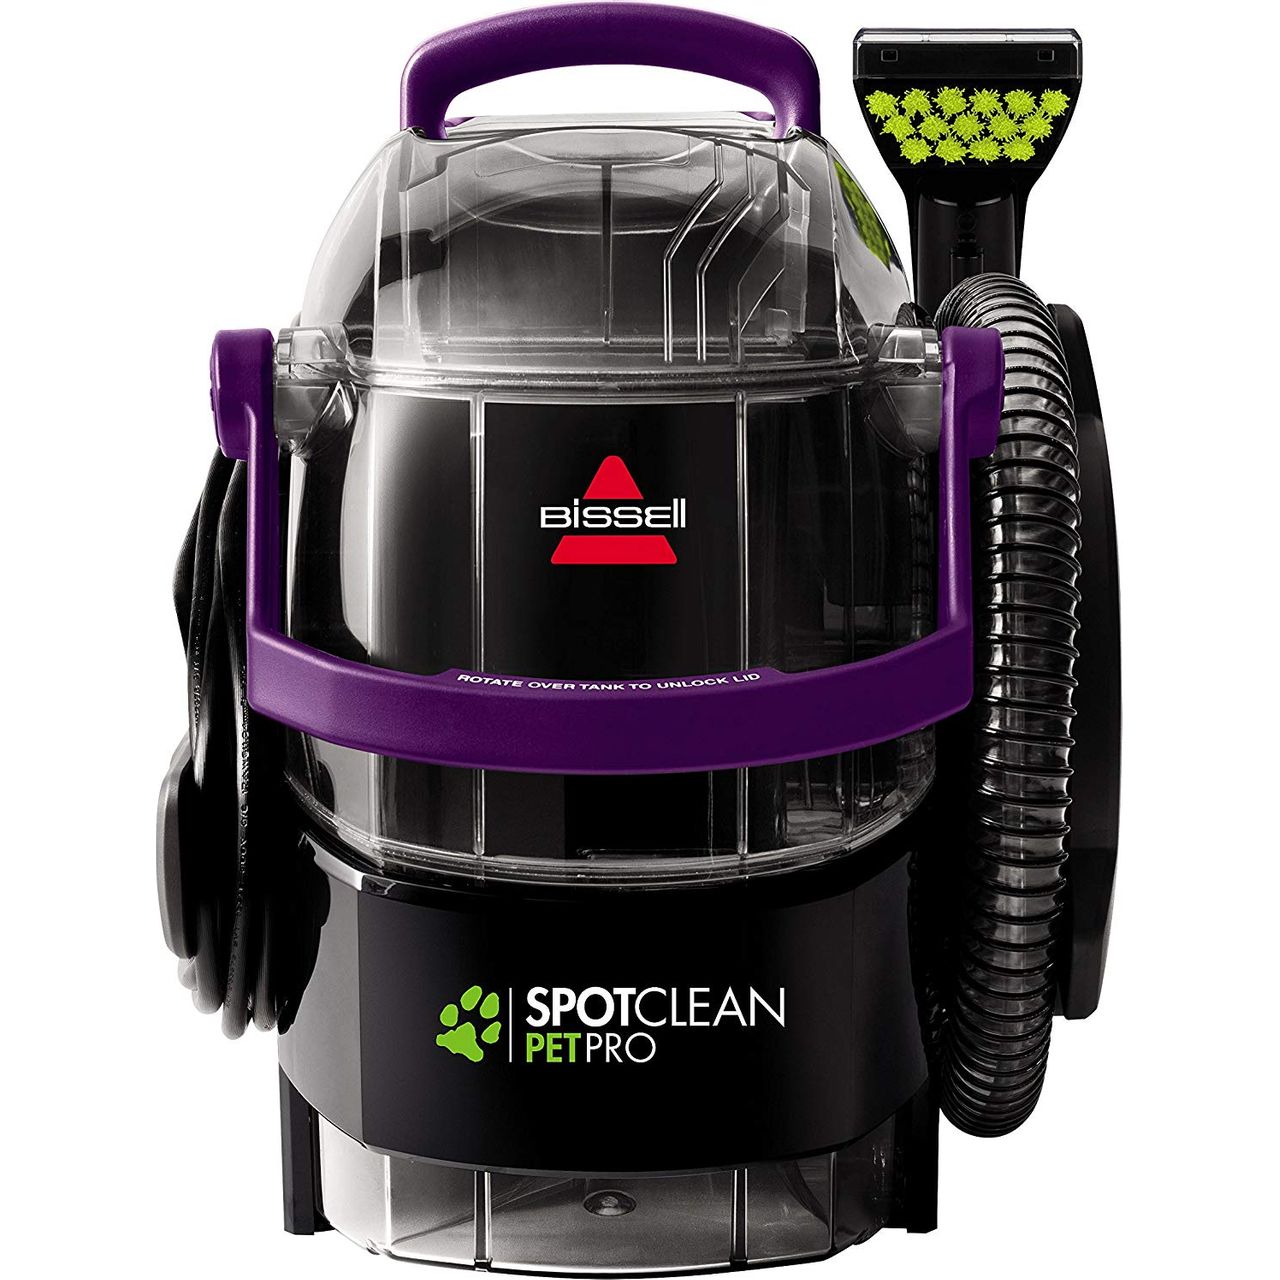 Bissell SpotClean Pet Pro 15588 Carpet Cleaner Review